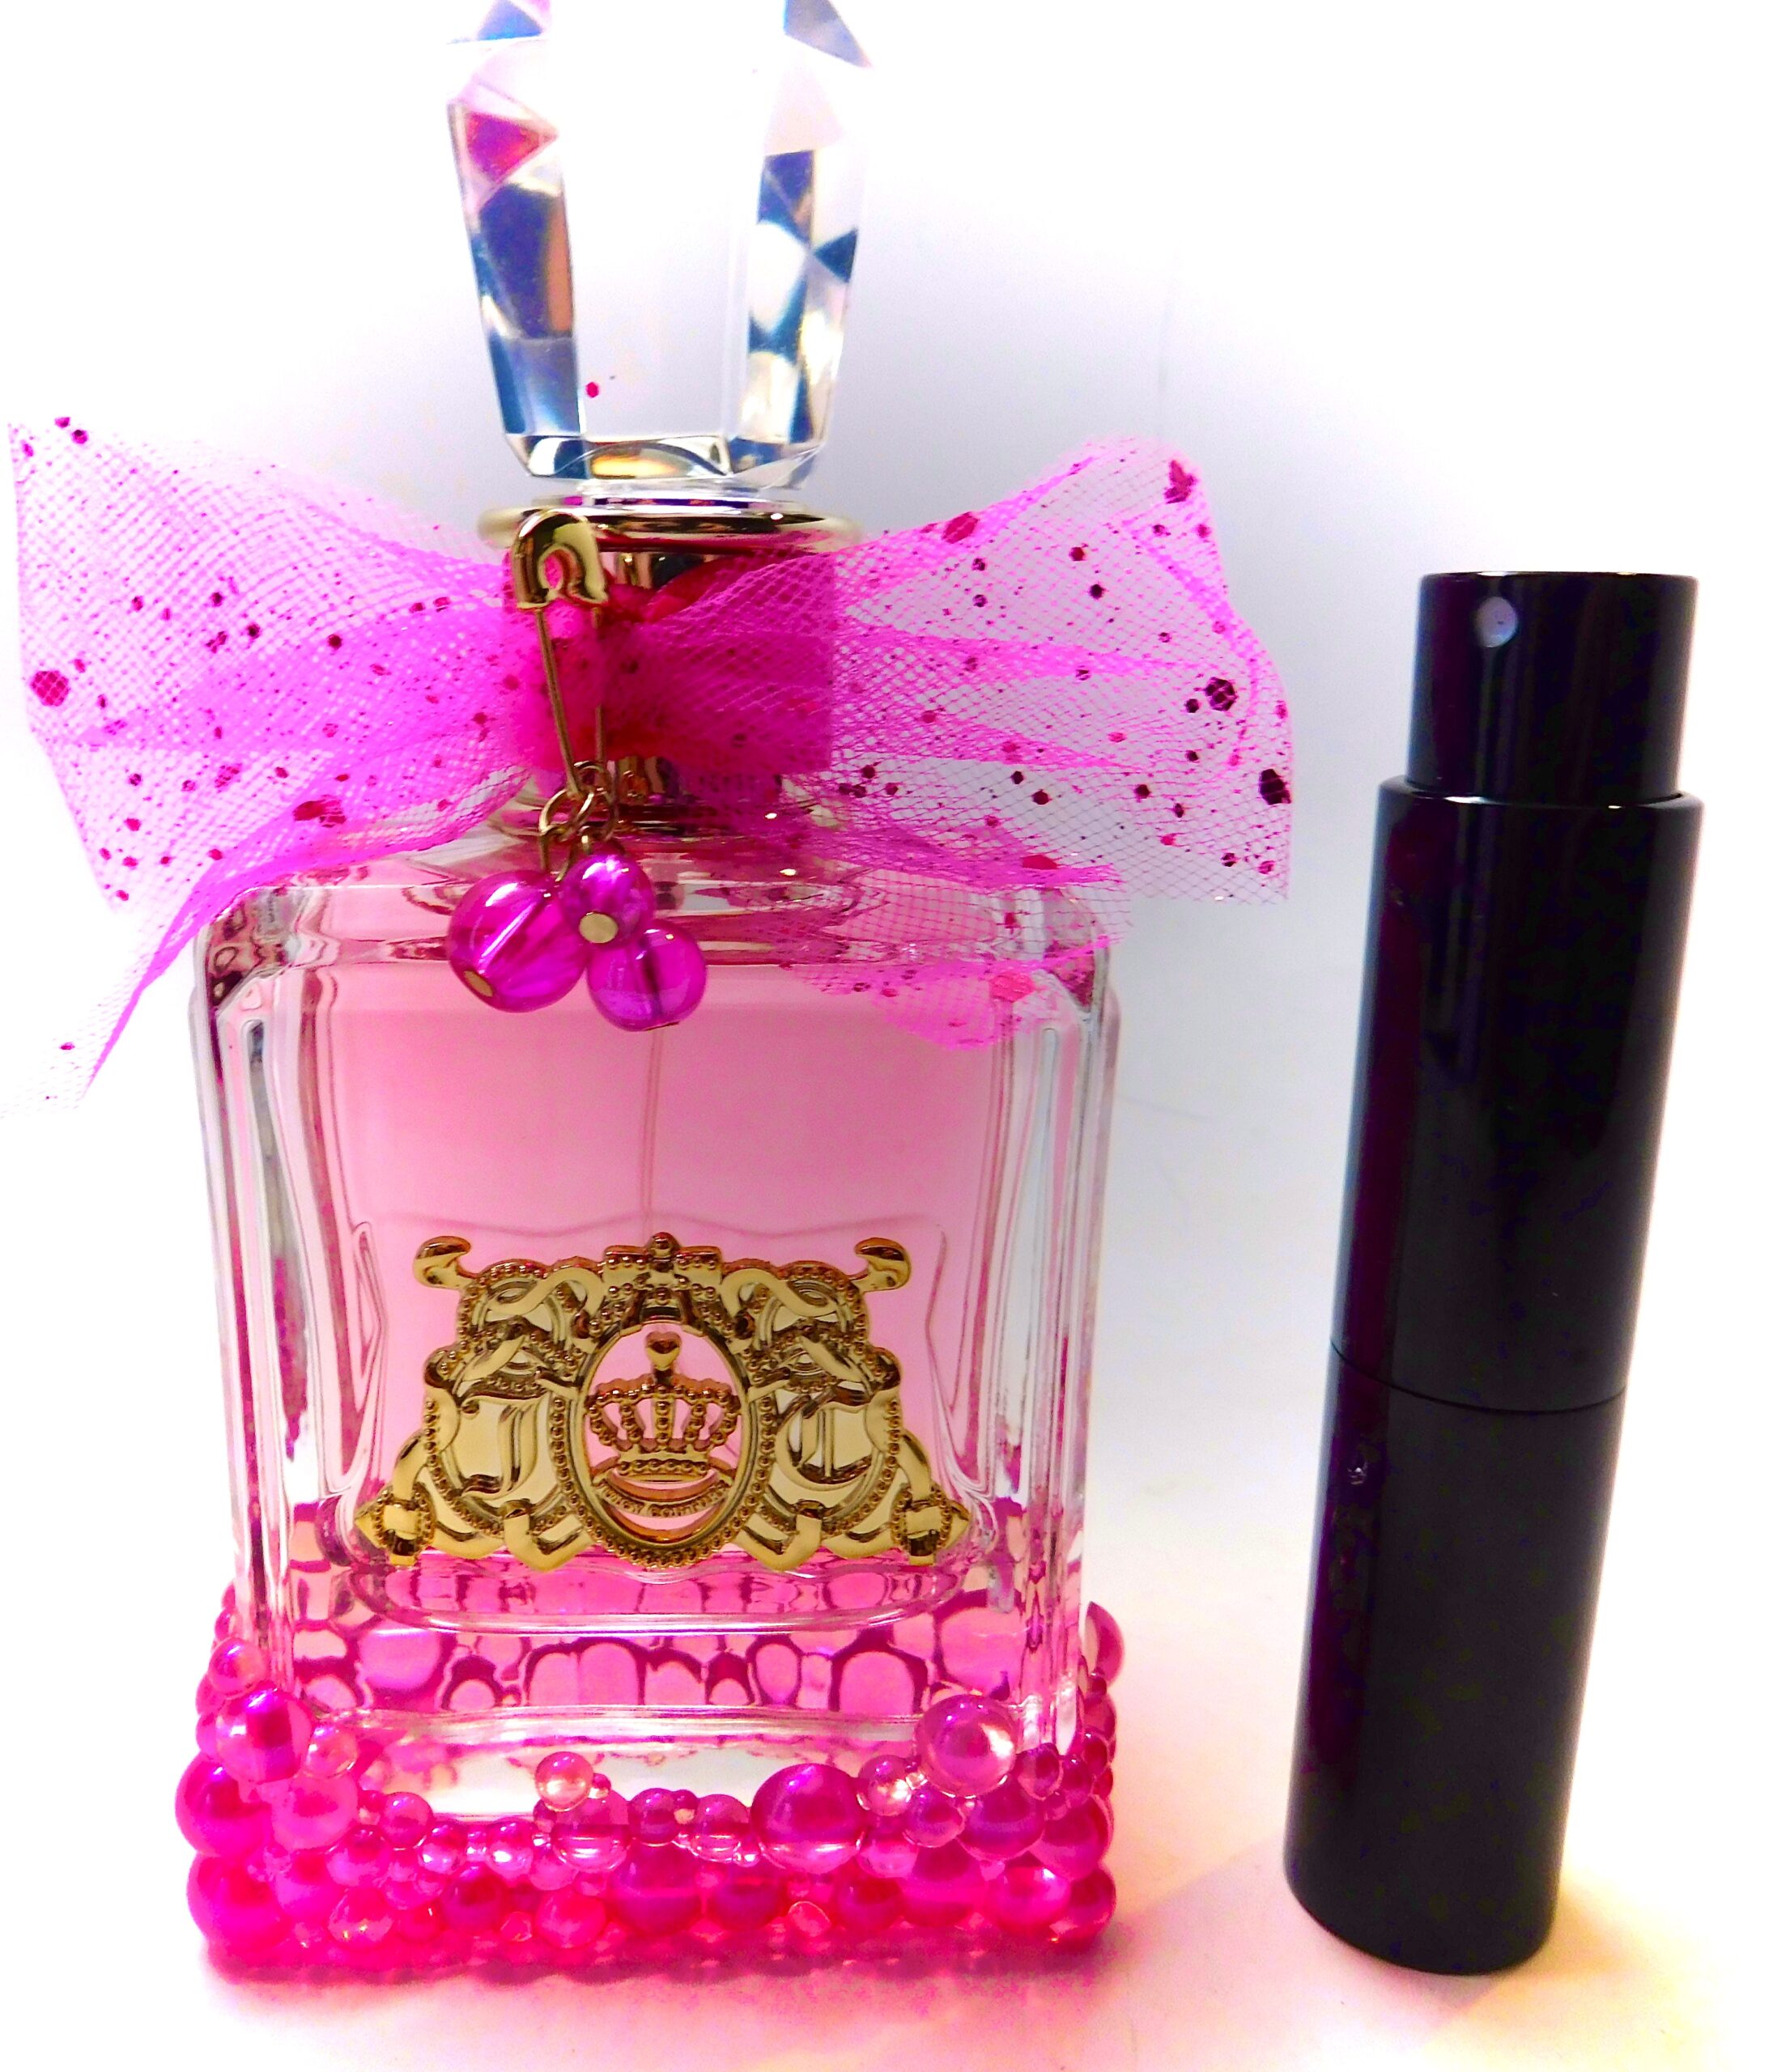 Juicy Couture Le Bubbly VIVA LA JUICY 8ml travel atomizer perfume with